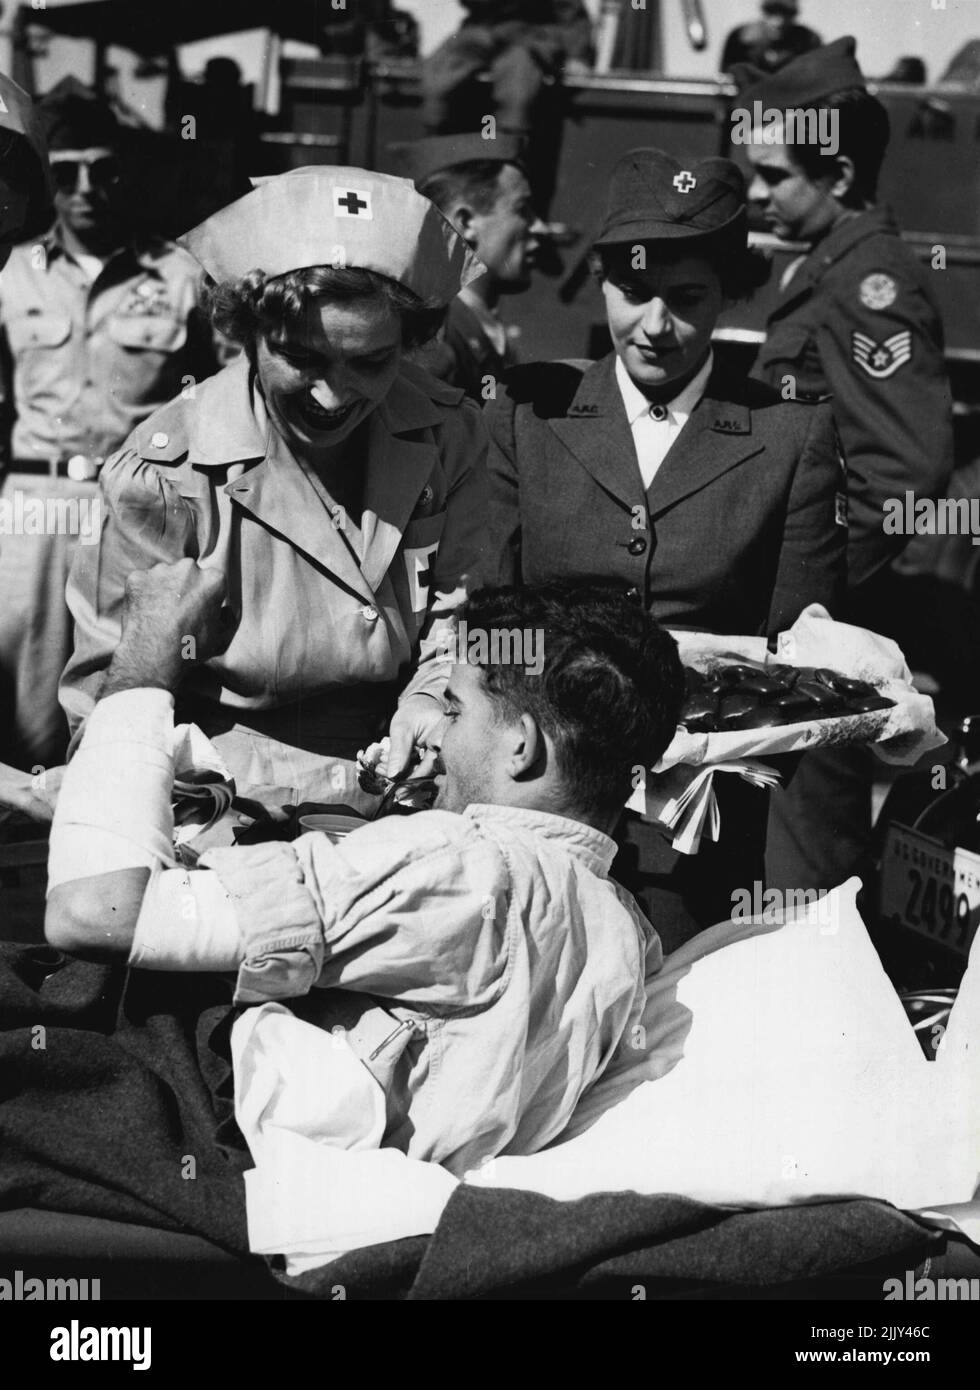 Air Bulletin, No. 6, Vol. 1 -- Red Cross Volunteers aid wounded, an American Soldier, wounded while fighting with United Nations force ***** is served refreshments by American Red Cross Volunteers. April 10, 1951. (Photo by United States Information Service). Stock Photo